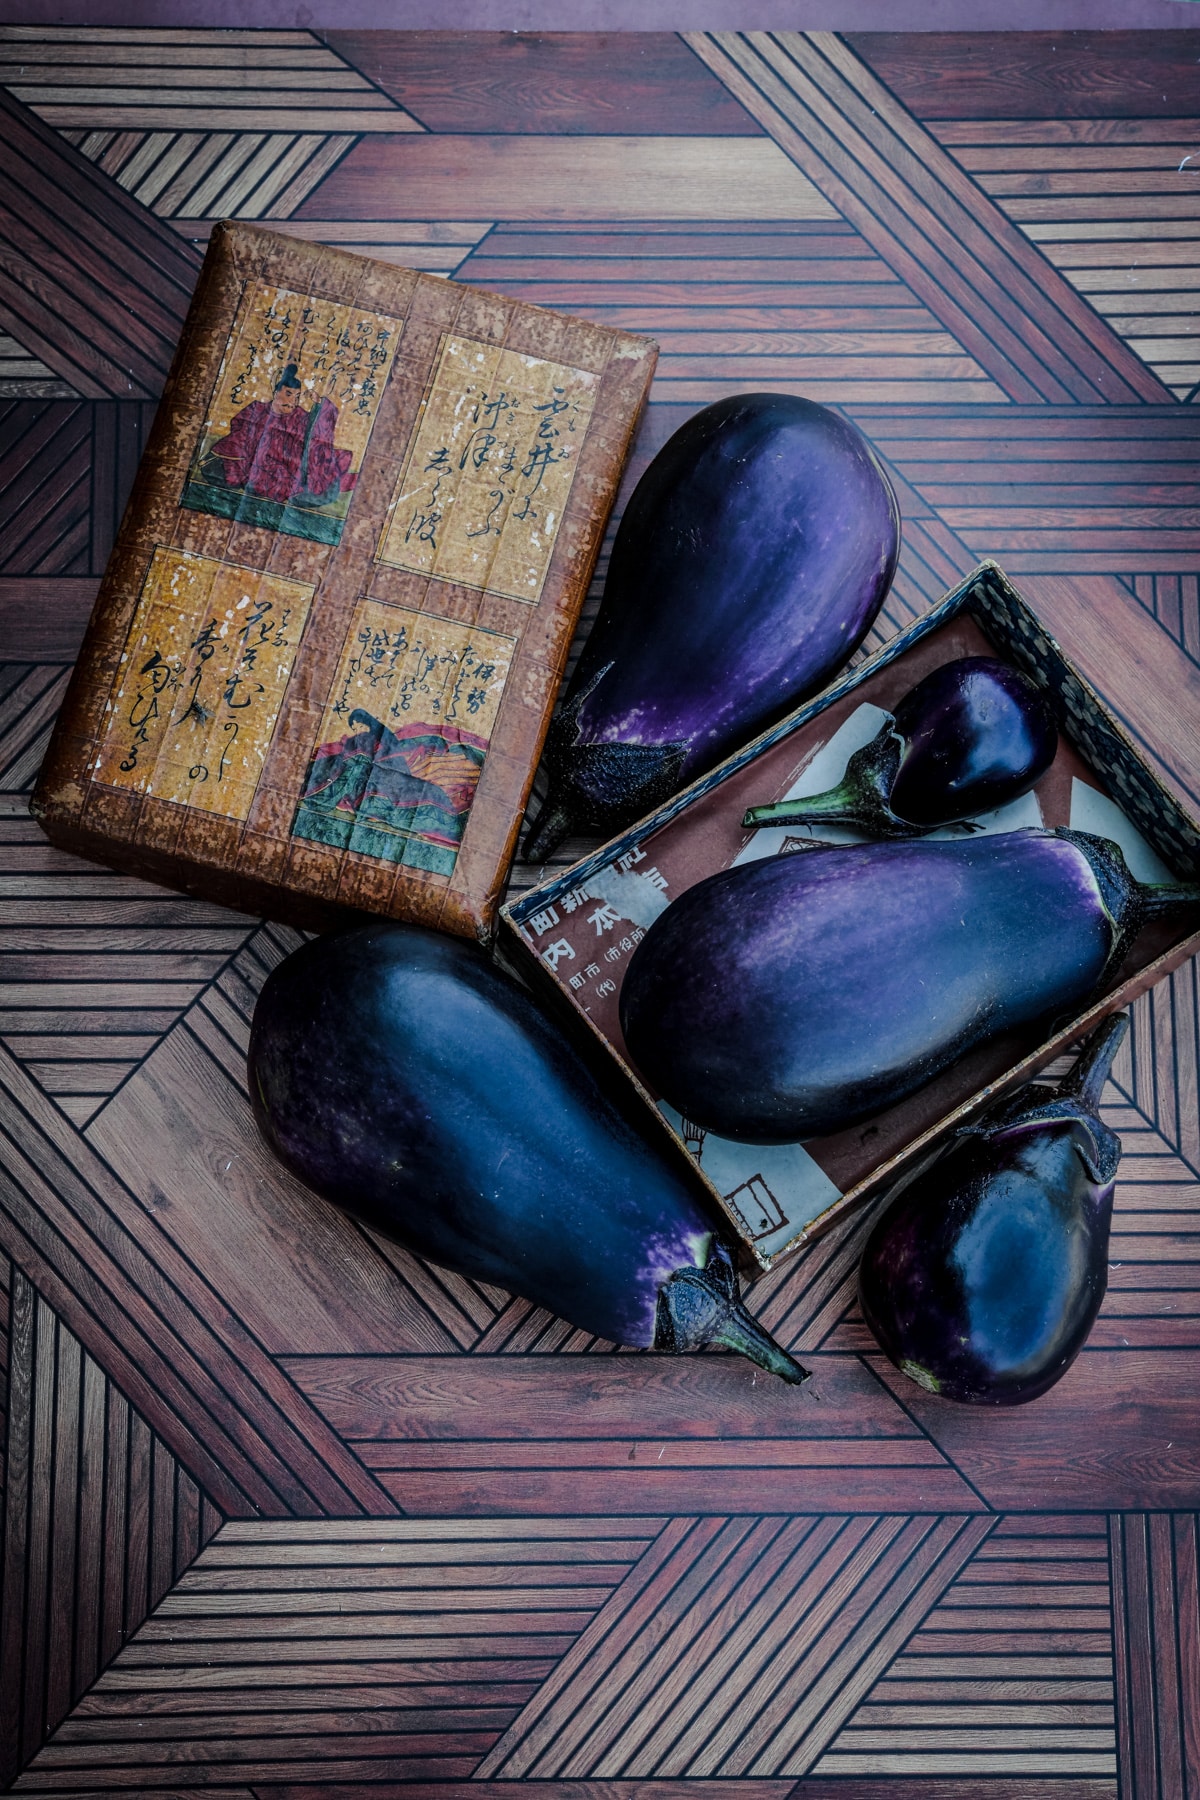 Mitoyo eggplant on a wooden surface.